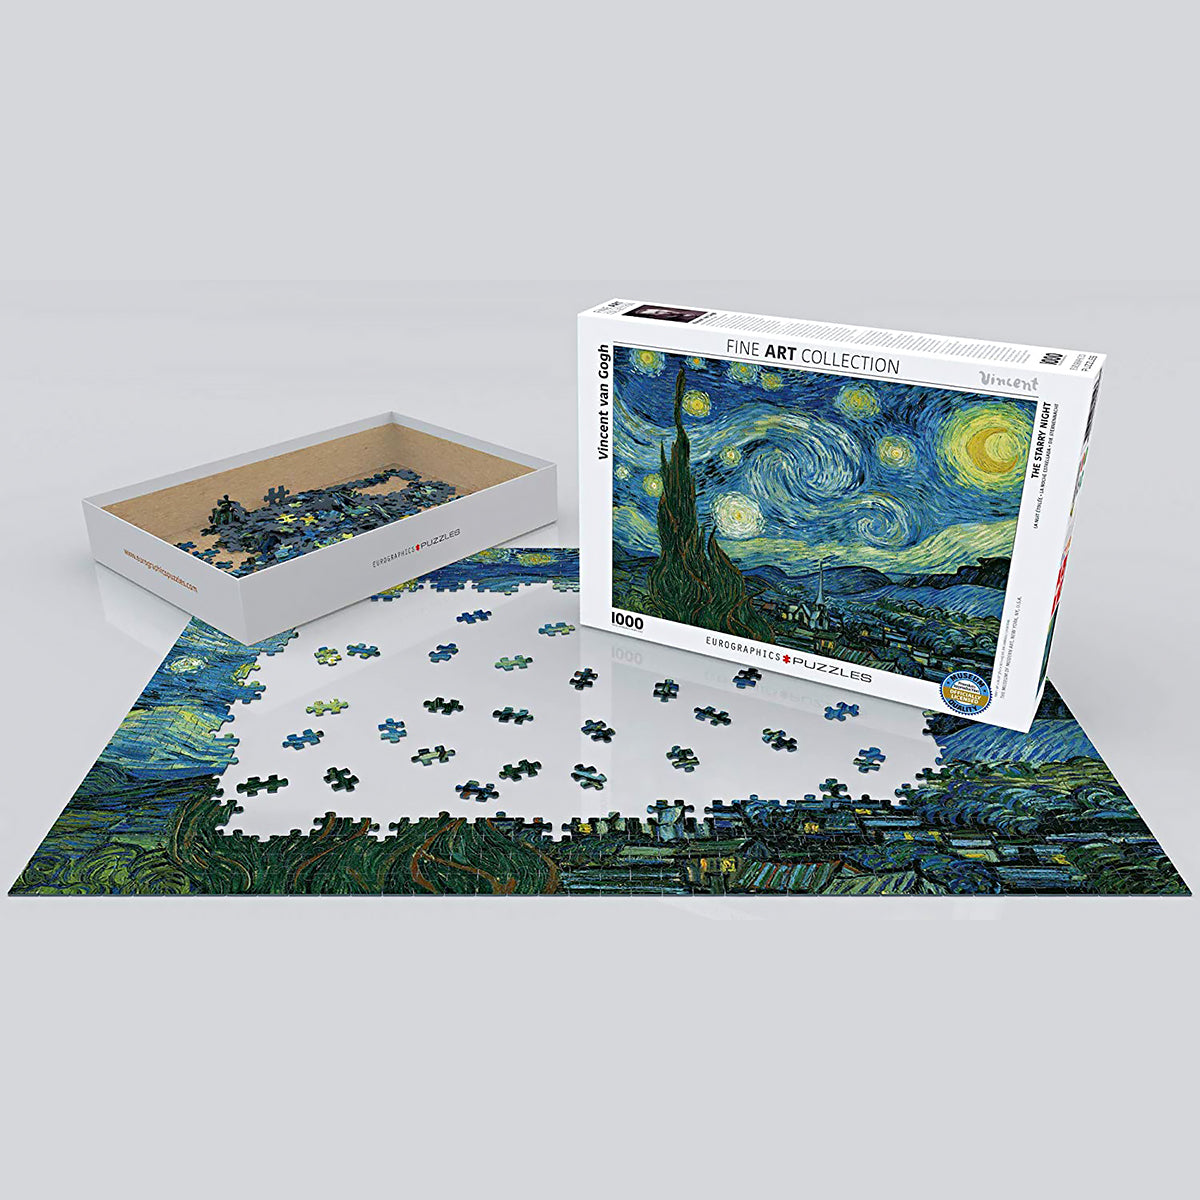 Vincent van Gogh’s The Starry Night is arguably the most famous and widely appreciated painting ever. But have you ever seen it in jigsaw puzzle form?